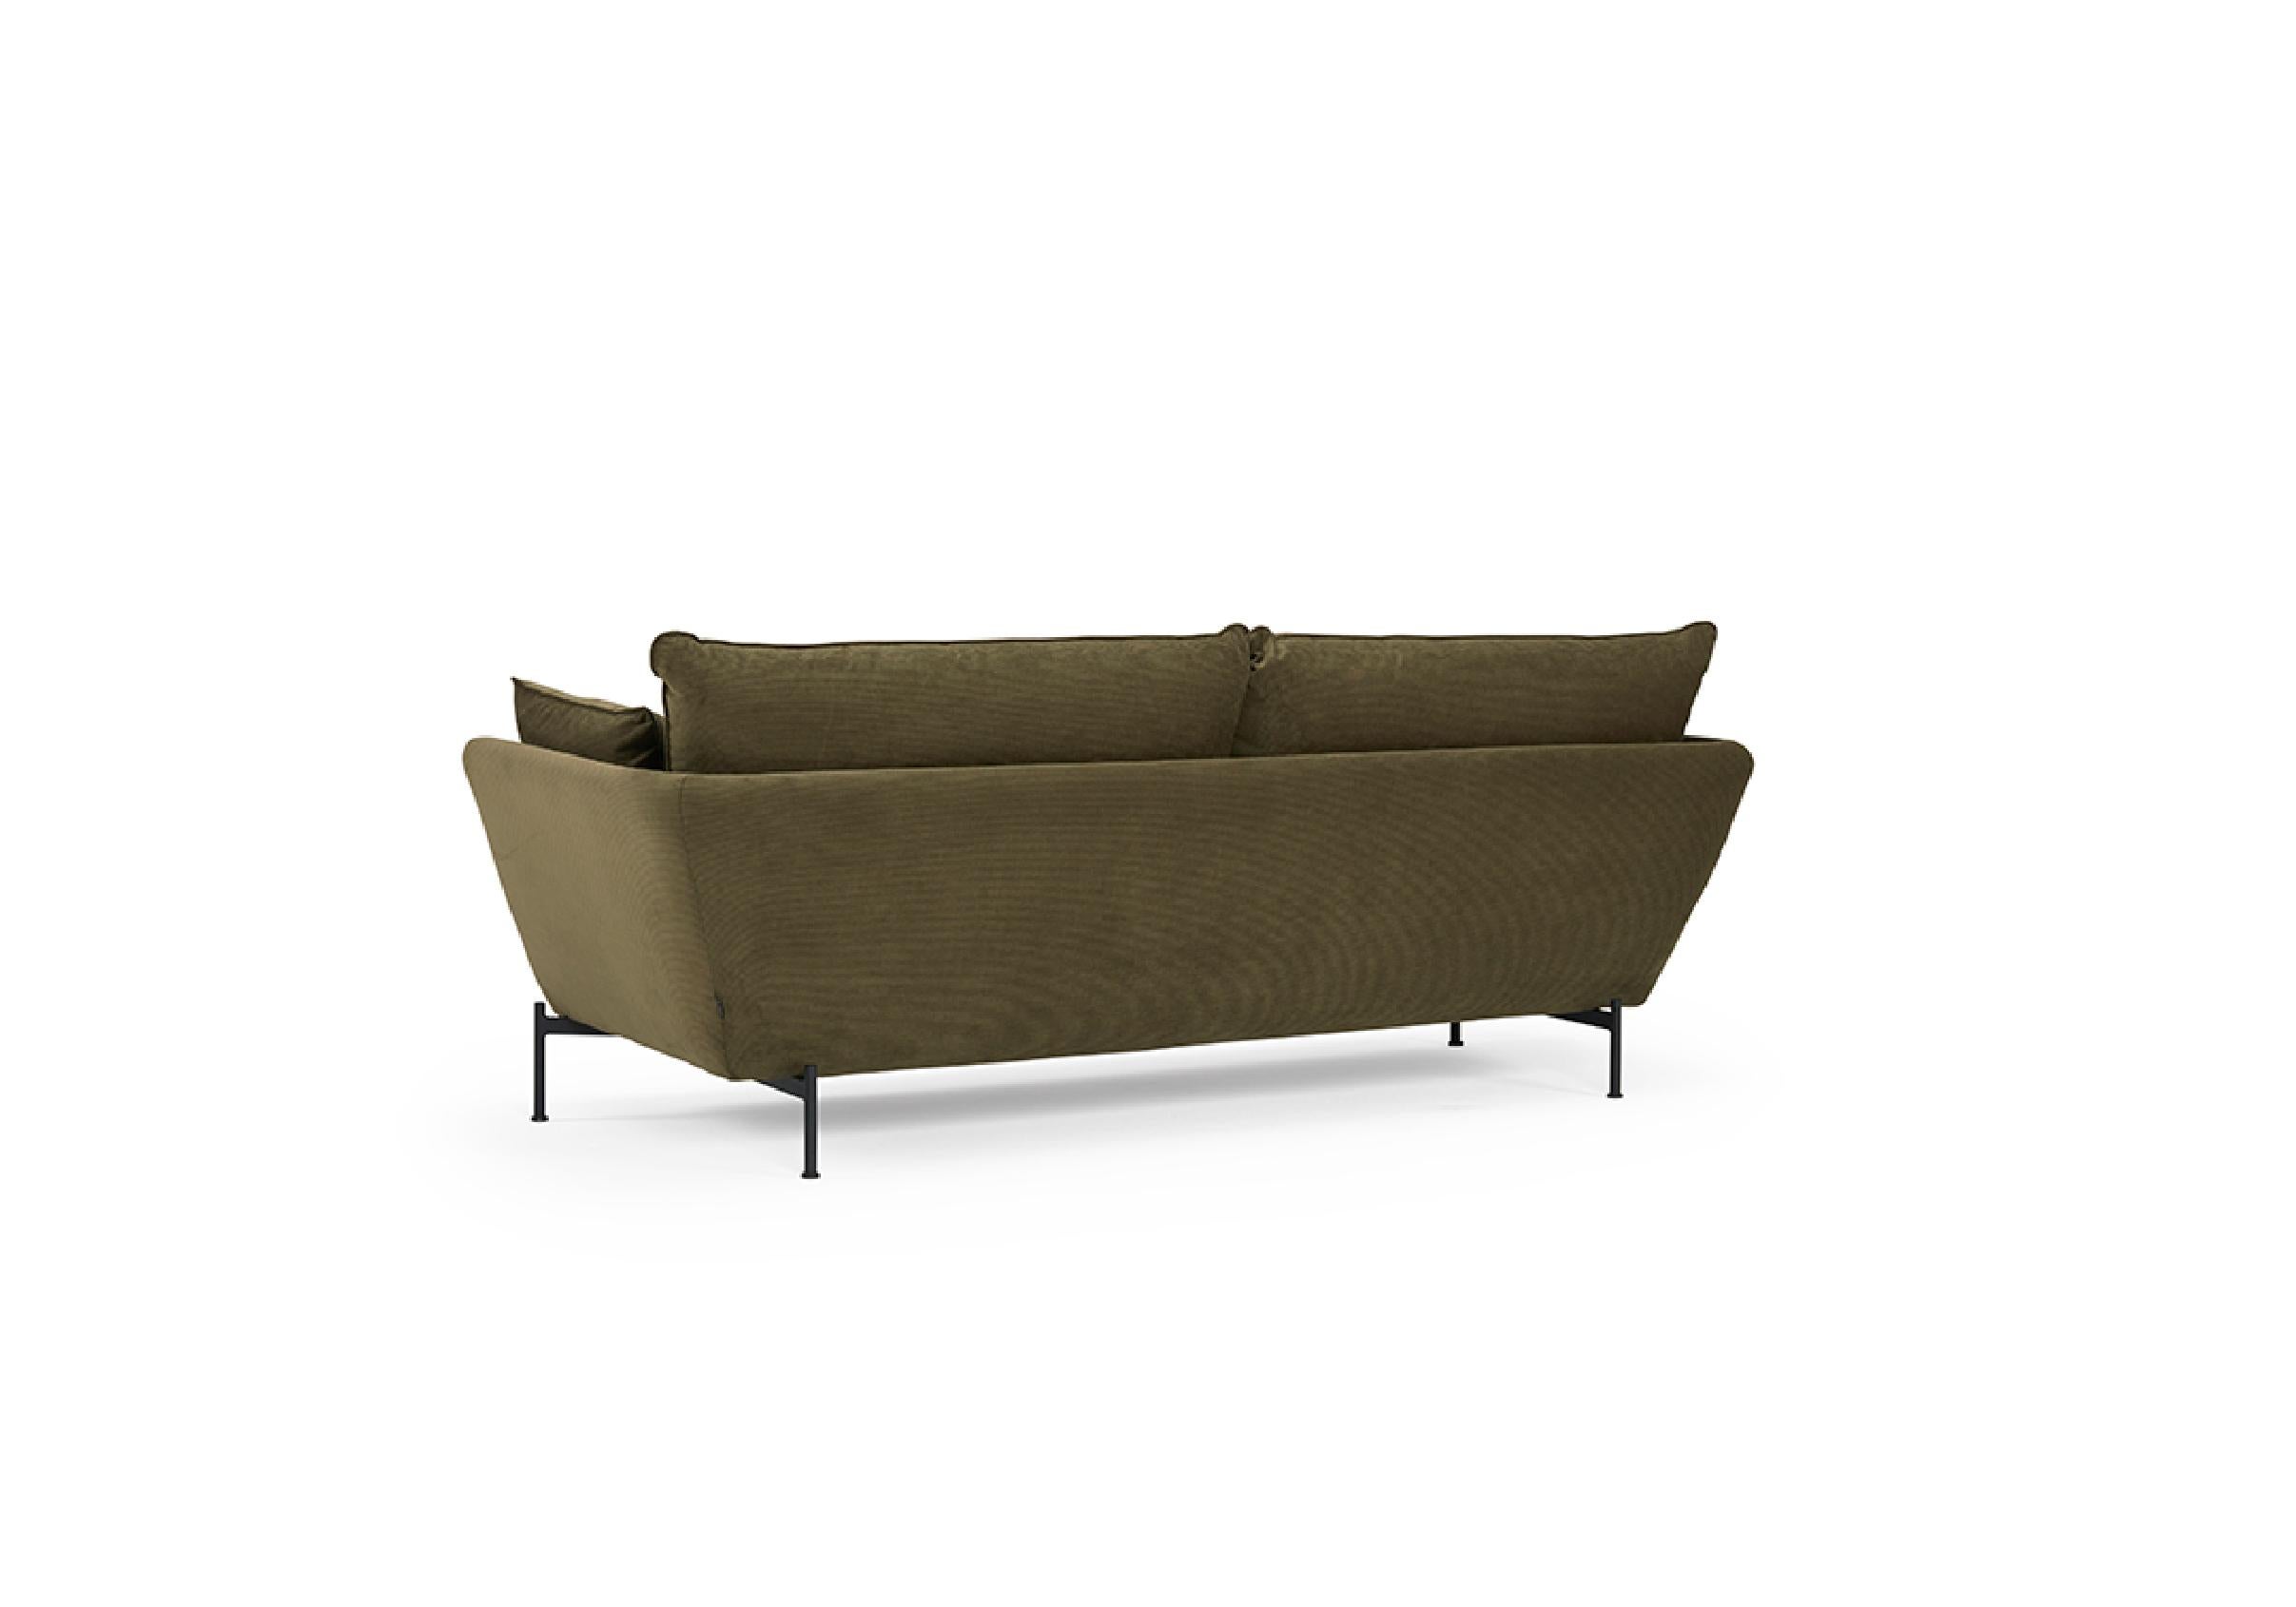 The Nave Lux 2 Seater Sofa exudes contemporary sophistication. As an OEM product, it comes with choices of black metal or oak lacquered legs, complemented by an array of fabric or wool upholstery finishes. Carefully designed for optimal comfort,